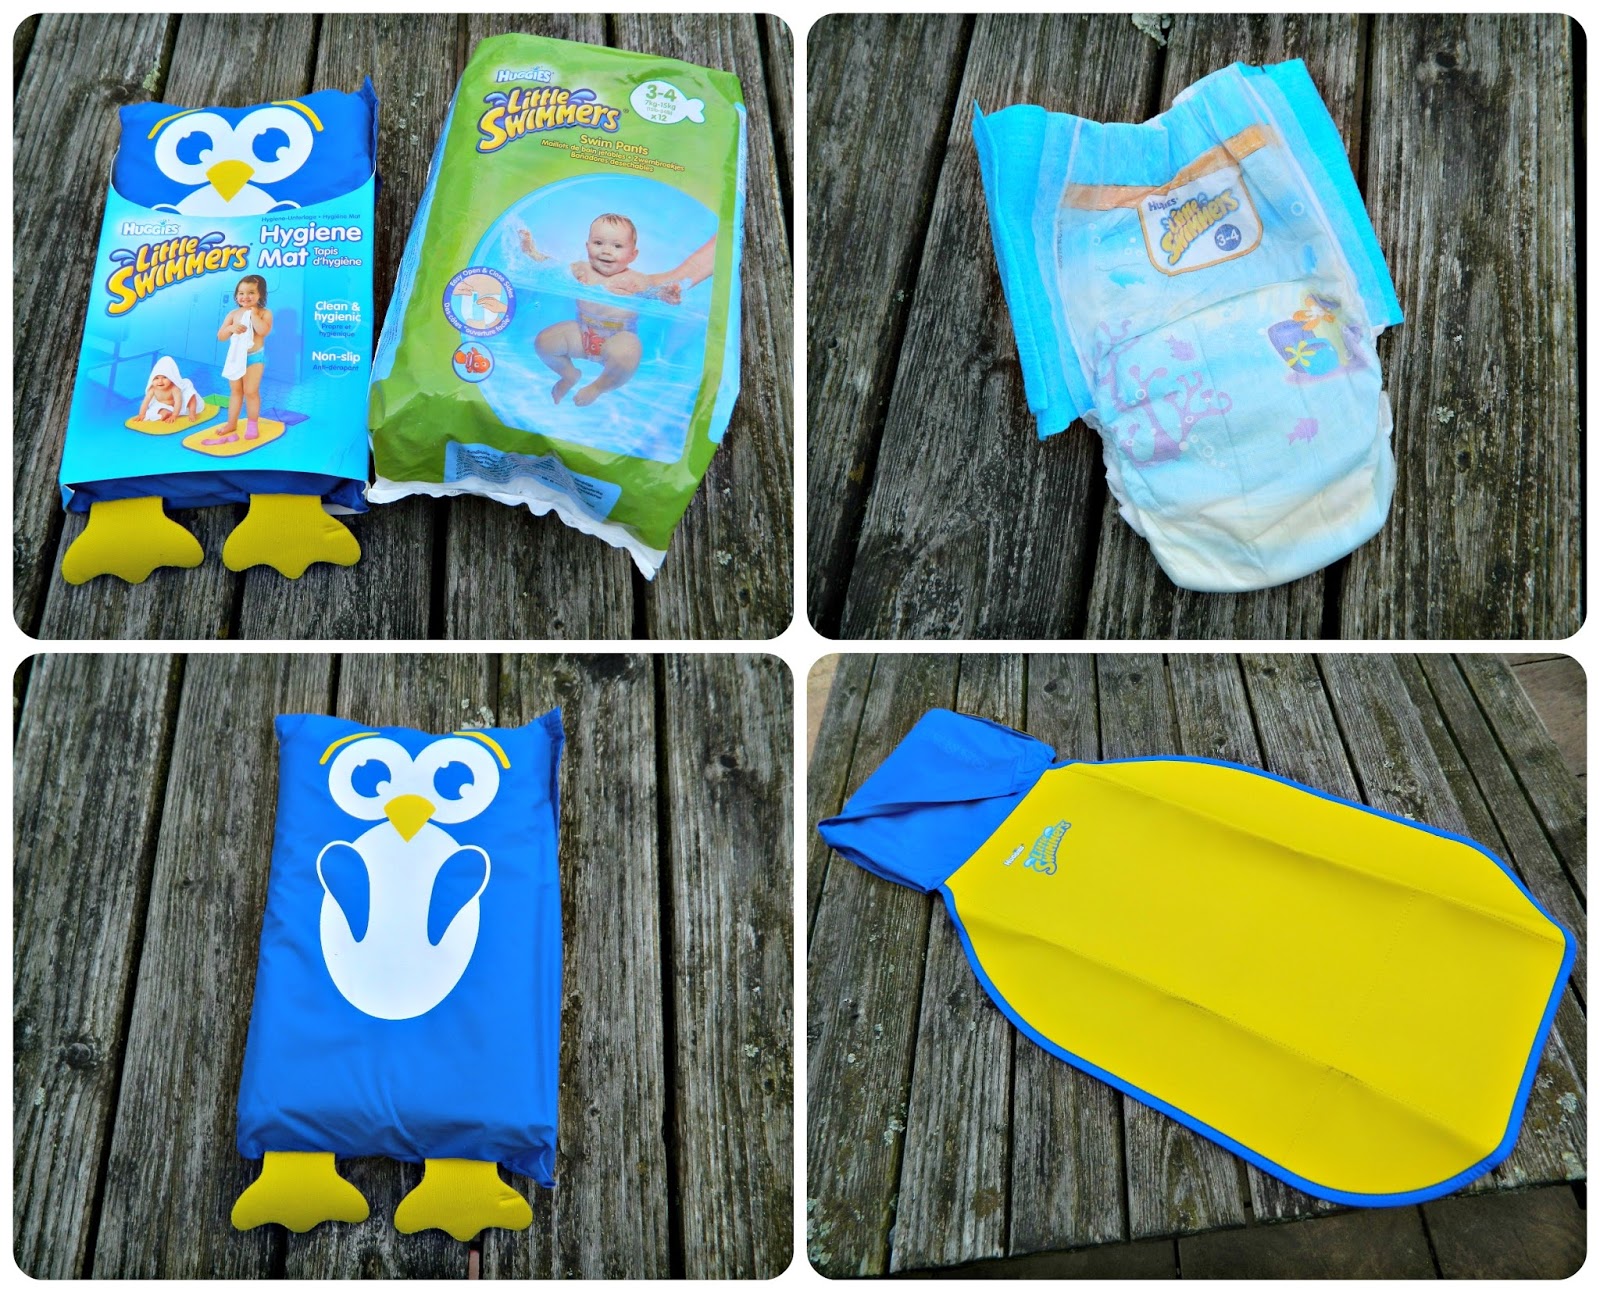 Huggies Little Swimmers Swim nappies and Hygiene Mats